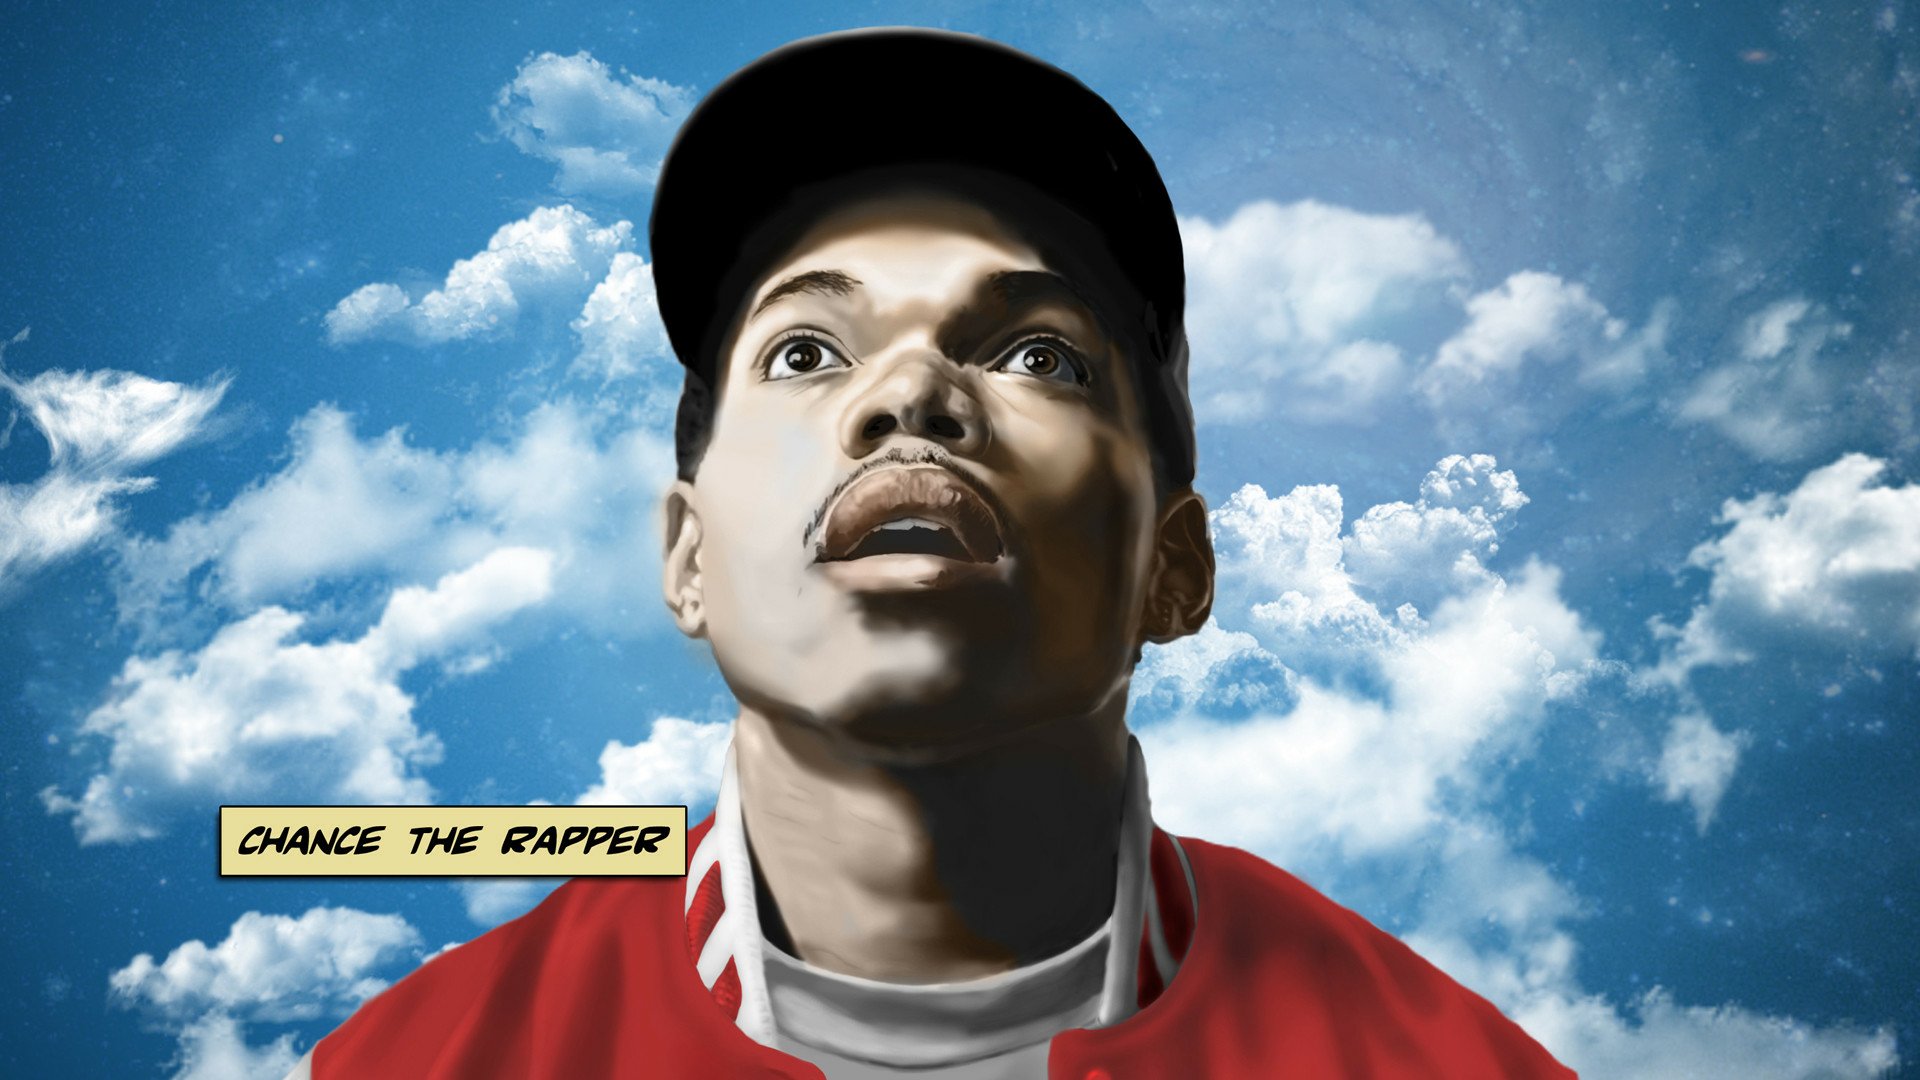 Chance The Rapper HD Wallpaper | Background Image | 1920x1080 | ID:664515 - Wallpaper Abyss